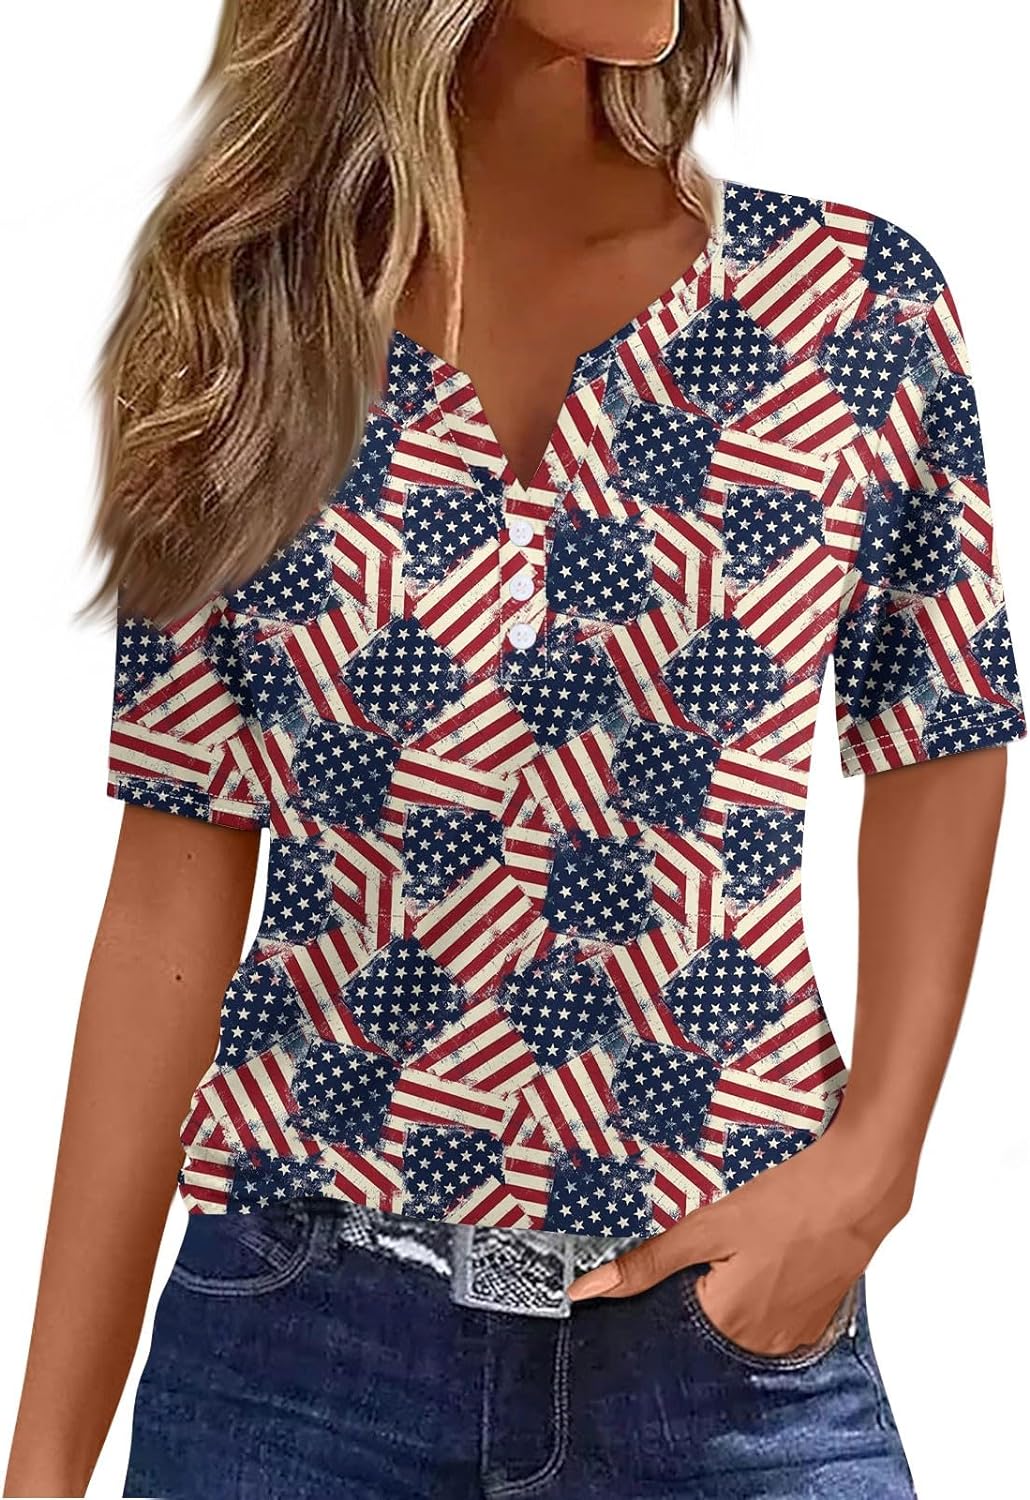 July 4 Shirts for Women,Women’s Summer T Shirt Button Short Sleeve Independence Day Tops Fashion Basic V Neck Casual Top